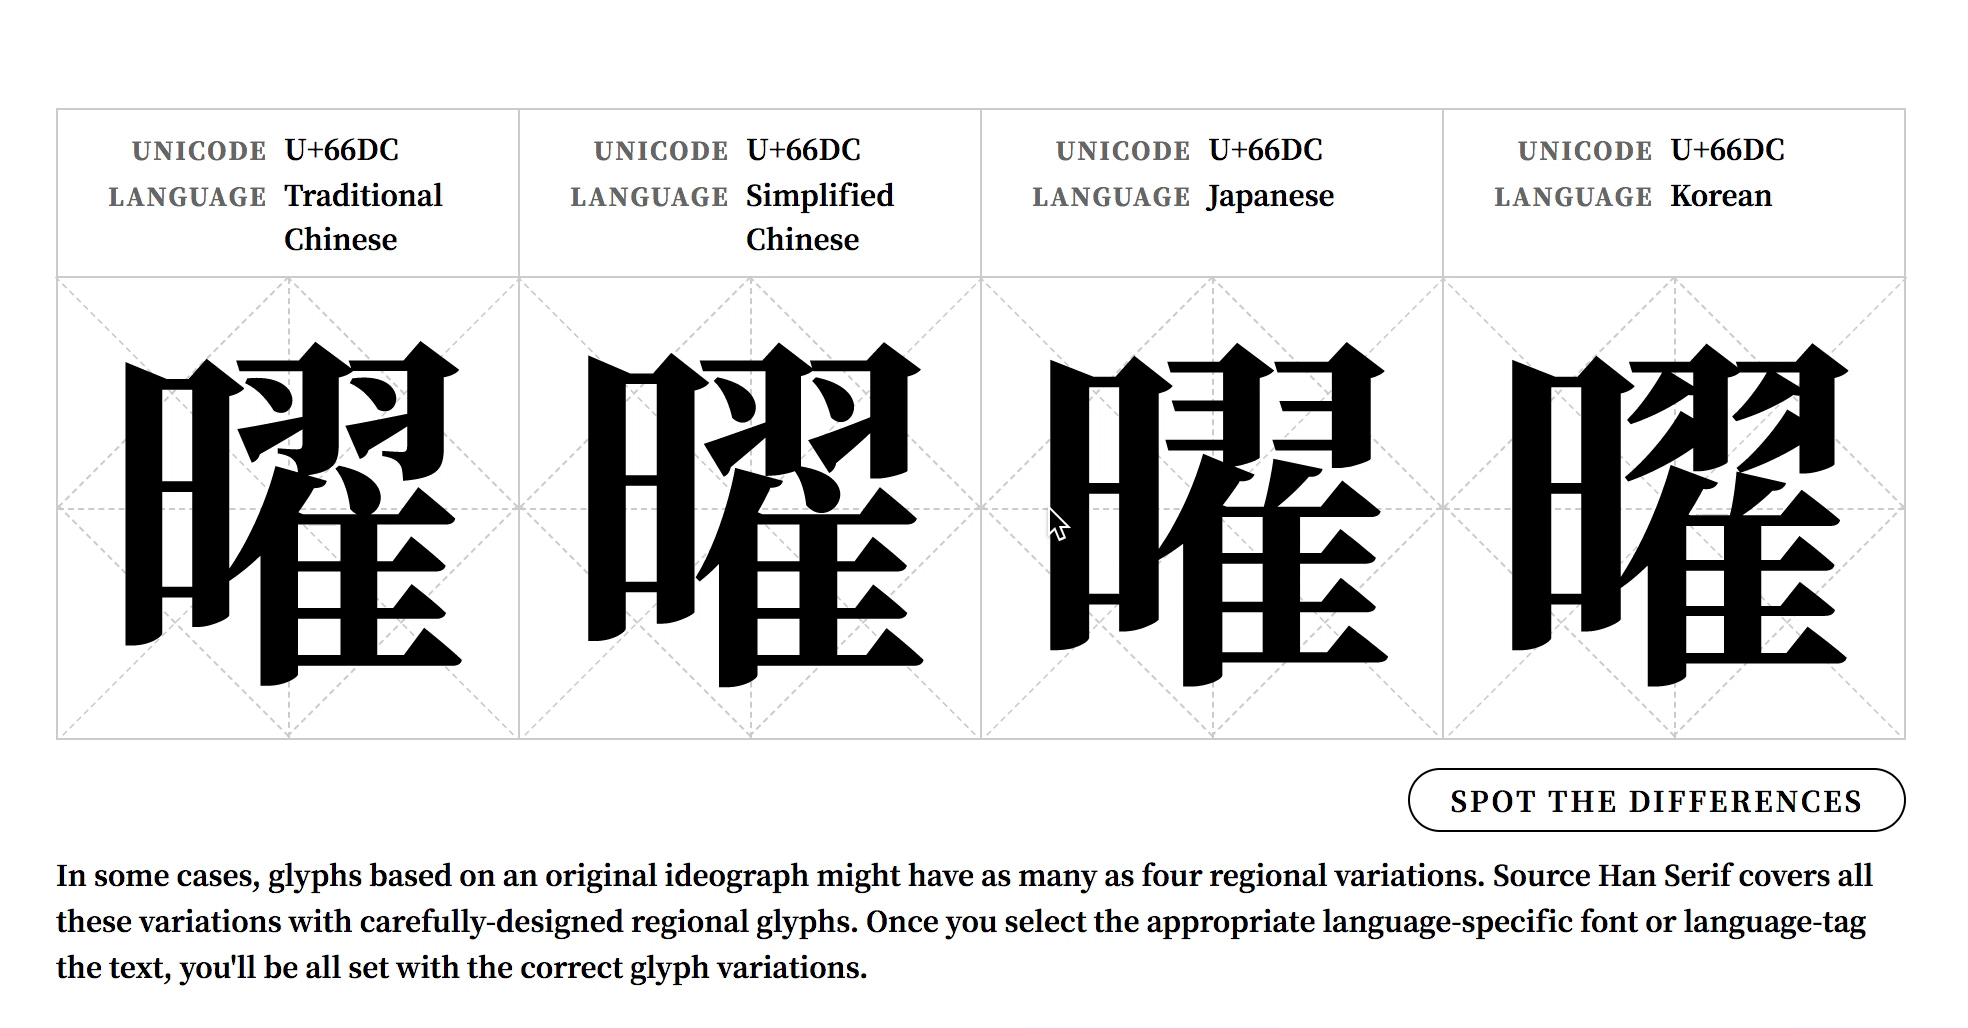 Spot-the-difference game on Source Han Serif website